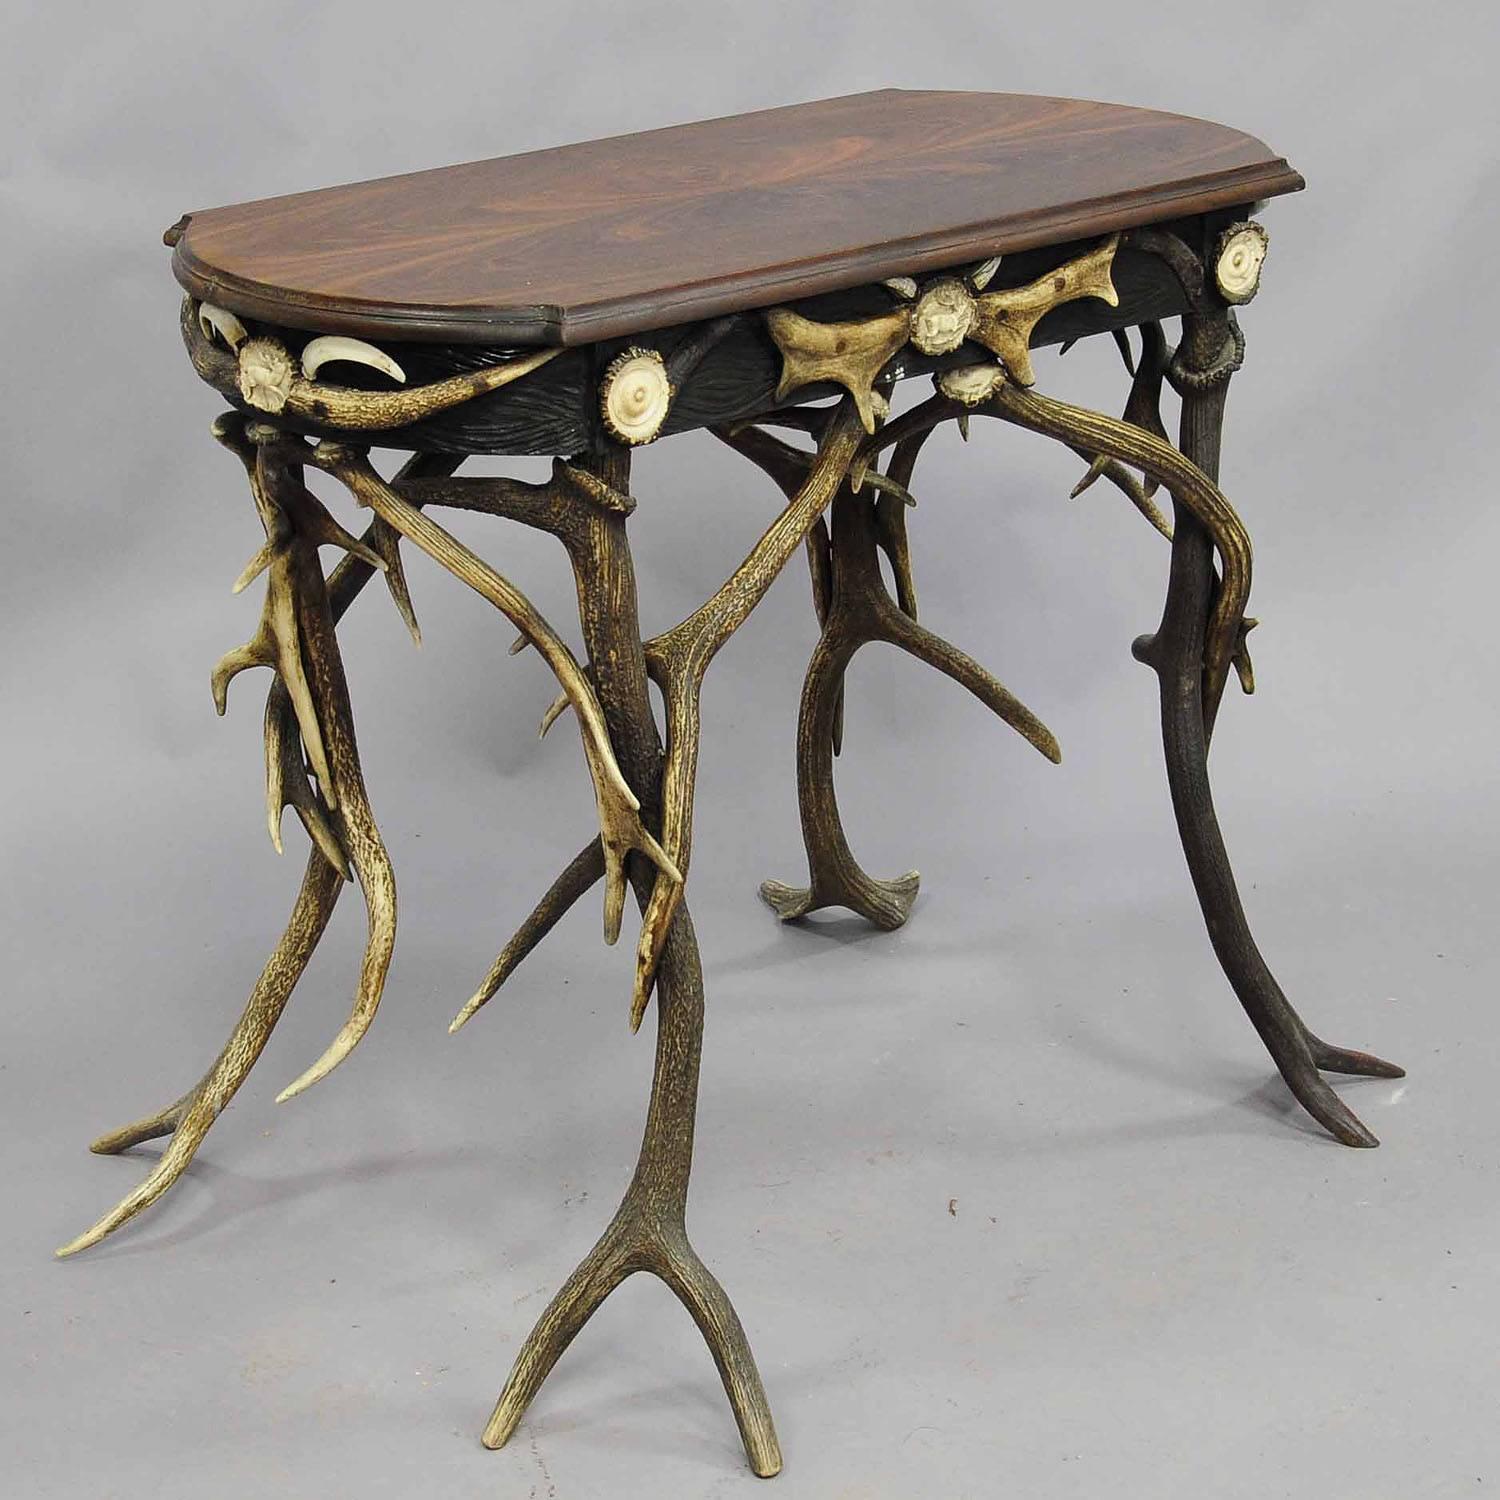 A small antique antler side table. Decorated with several antlers from the deer, fallow deer and stag. Each side with turned and carved Horn roses. Walnut top with carved border. Executed circa 1890.